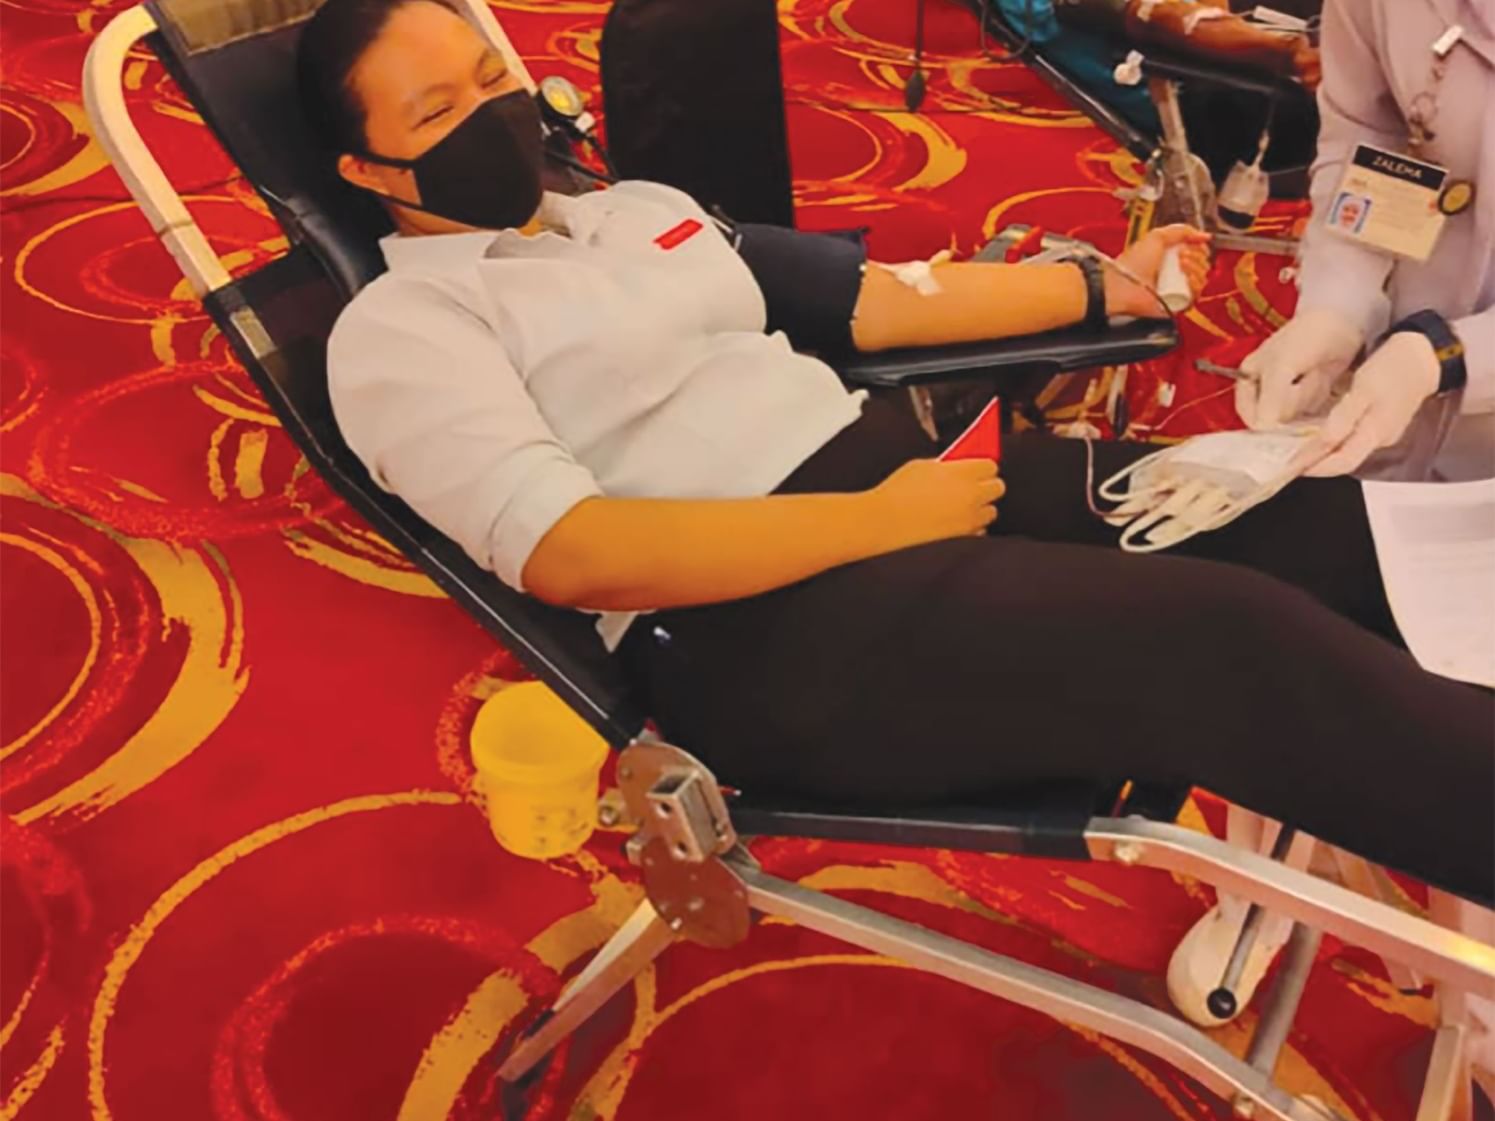 Lexis PD blood donation initiative